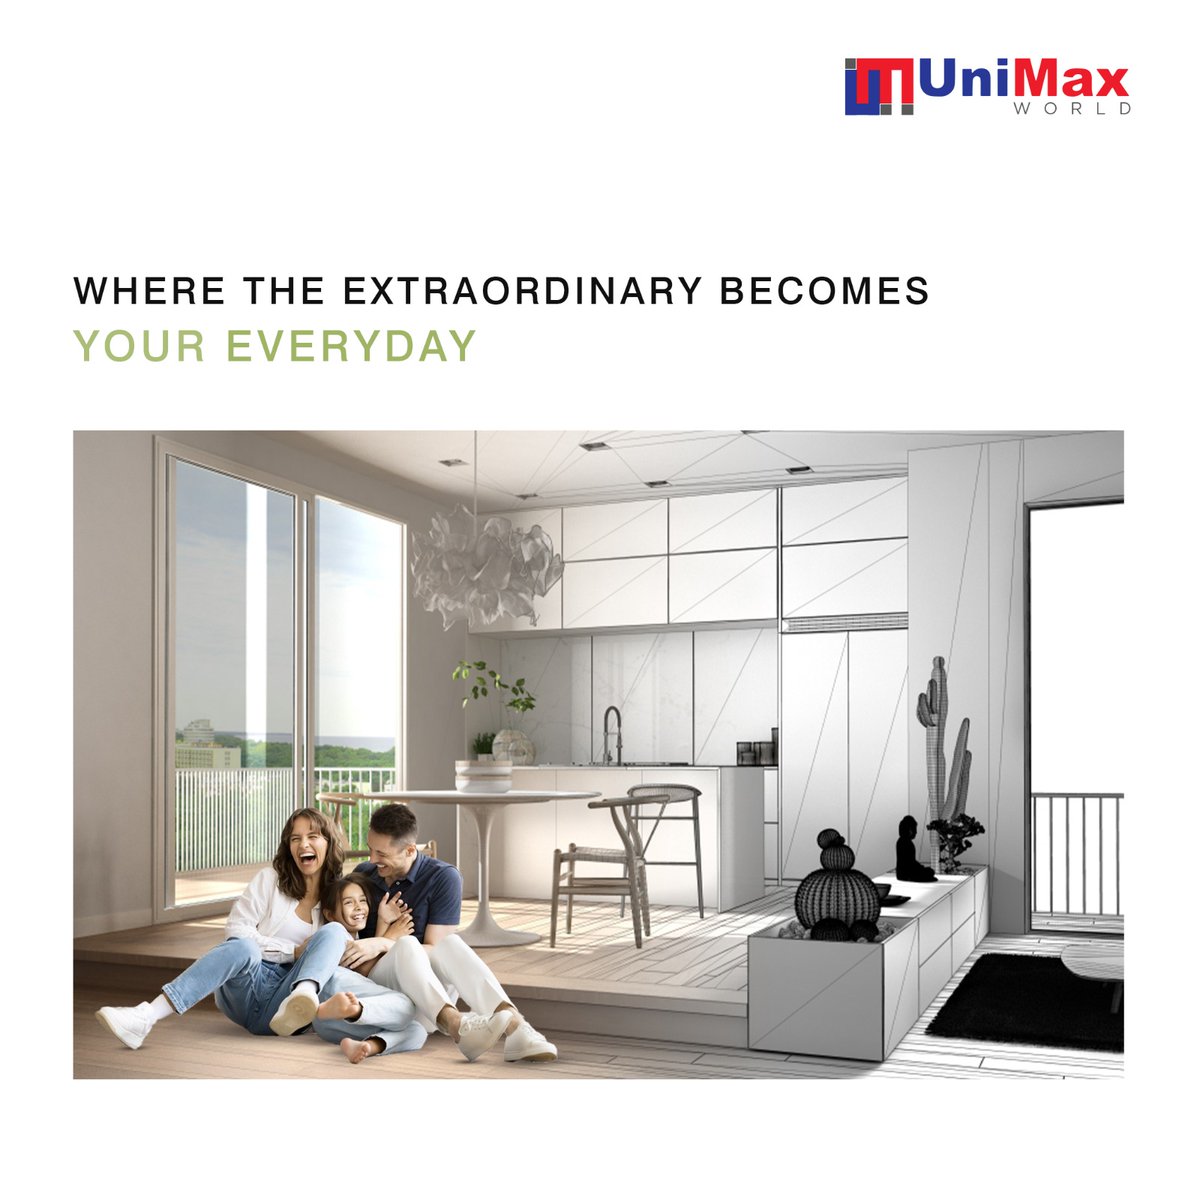 Make the extraordinary your everyday reality. Immerse yourself in a world where exceptional is ordinary, and dreams are standard.

#UnimaxWorld #ExtraordinaryLiving #EverydayLuxury #DreamLifestyle #ExceptionalStandard #LuxuryLiving #DreamsComeTrue #LiveExceptional